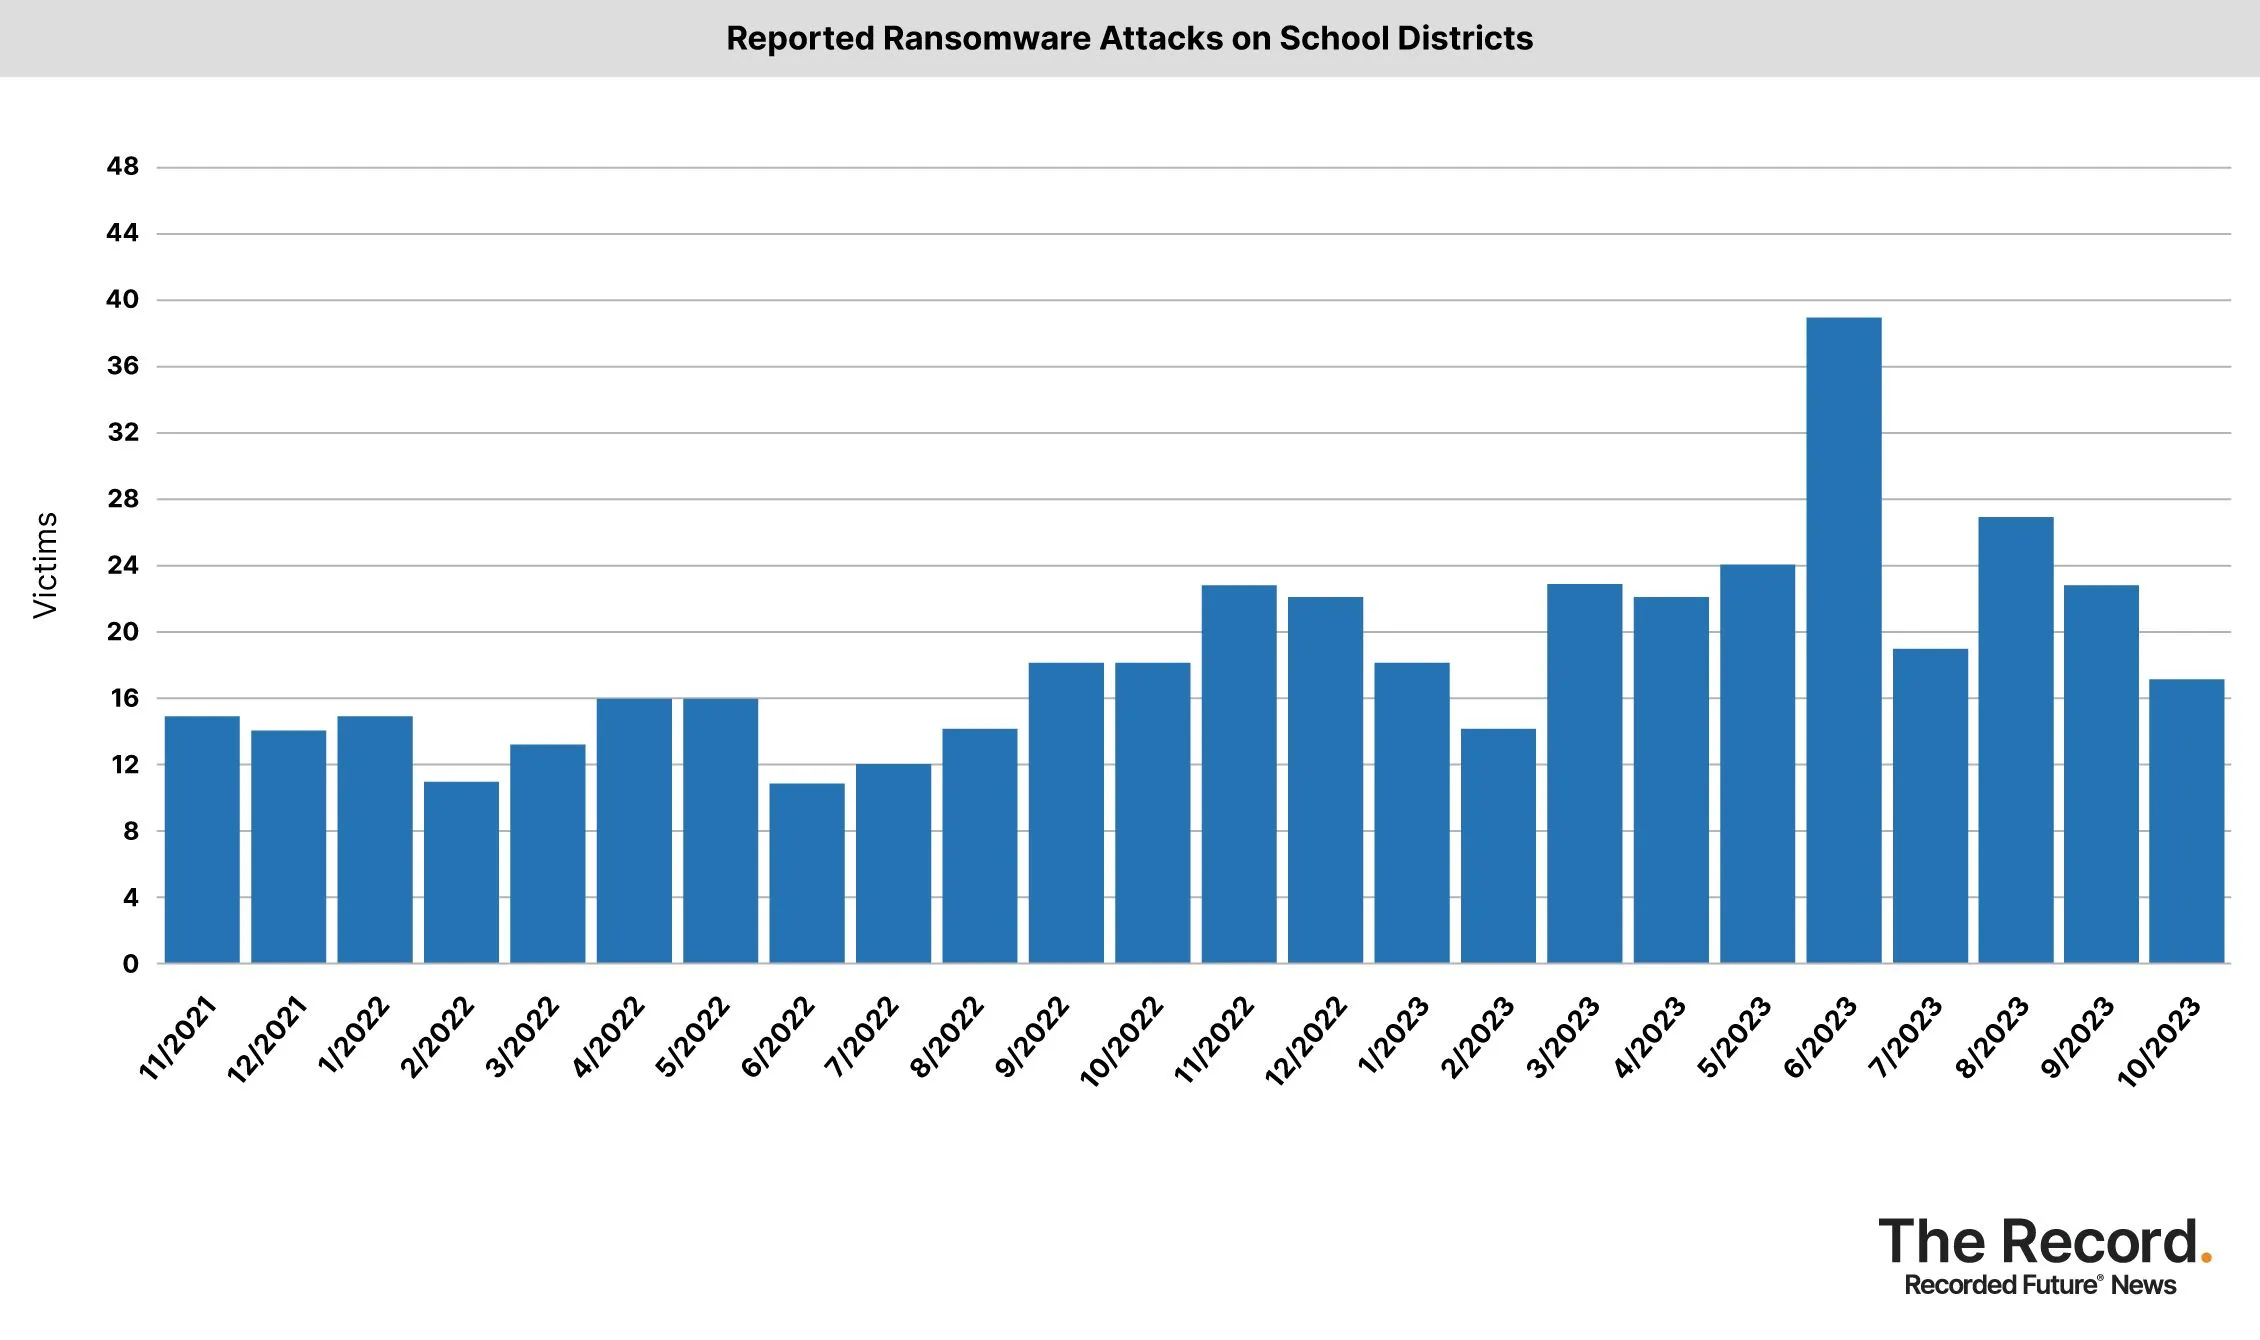 2023_1109 - Ransomware Tracker - Reported Ransomware Attacks on School Districts.jpg